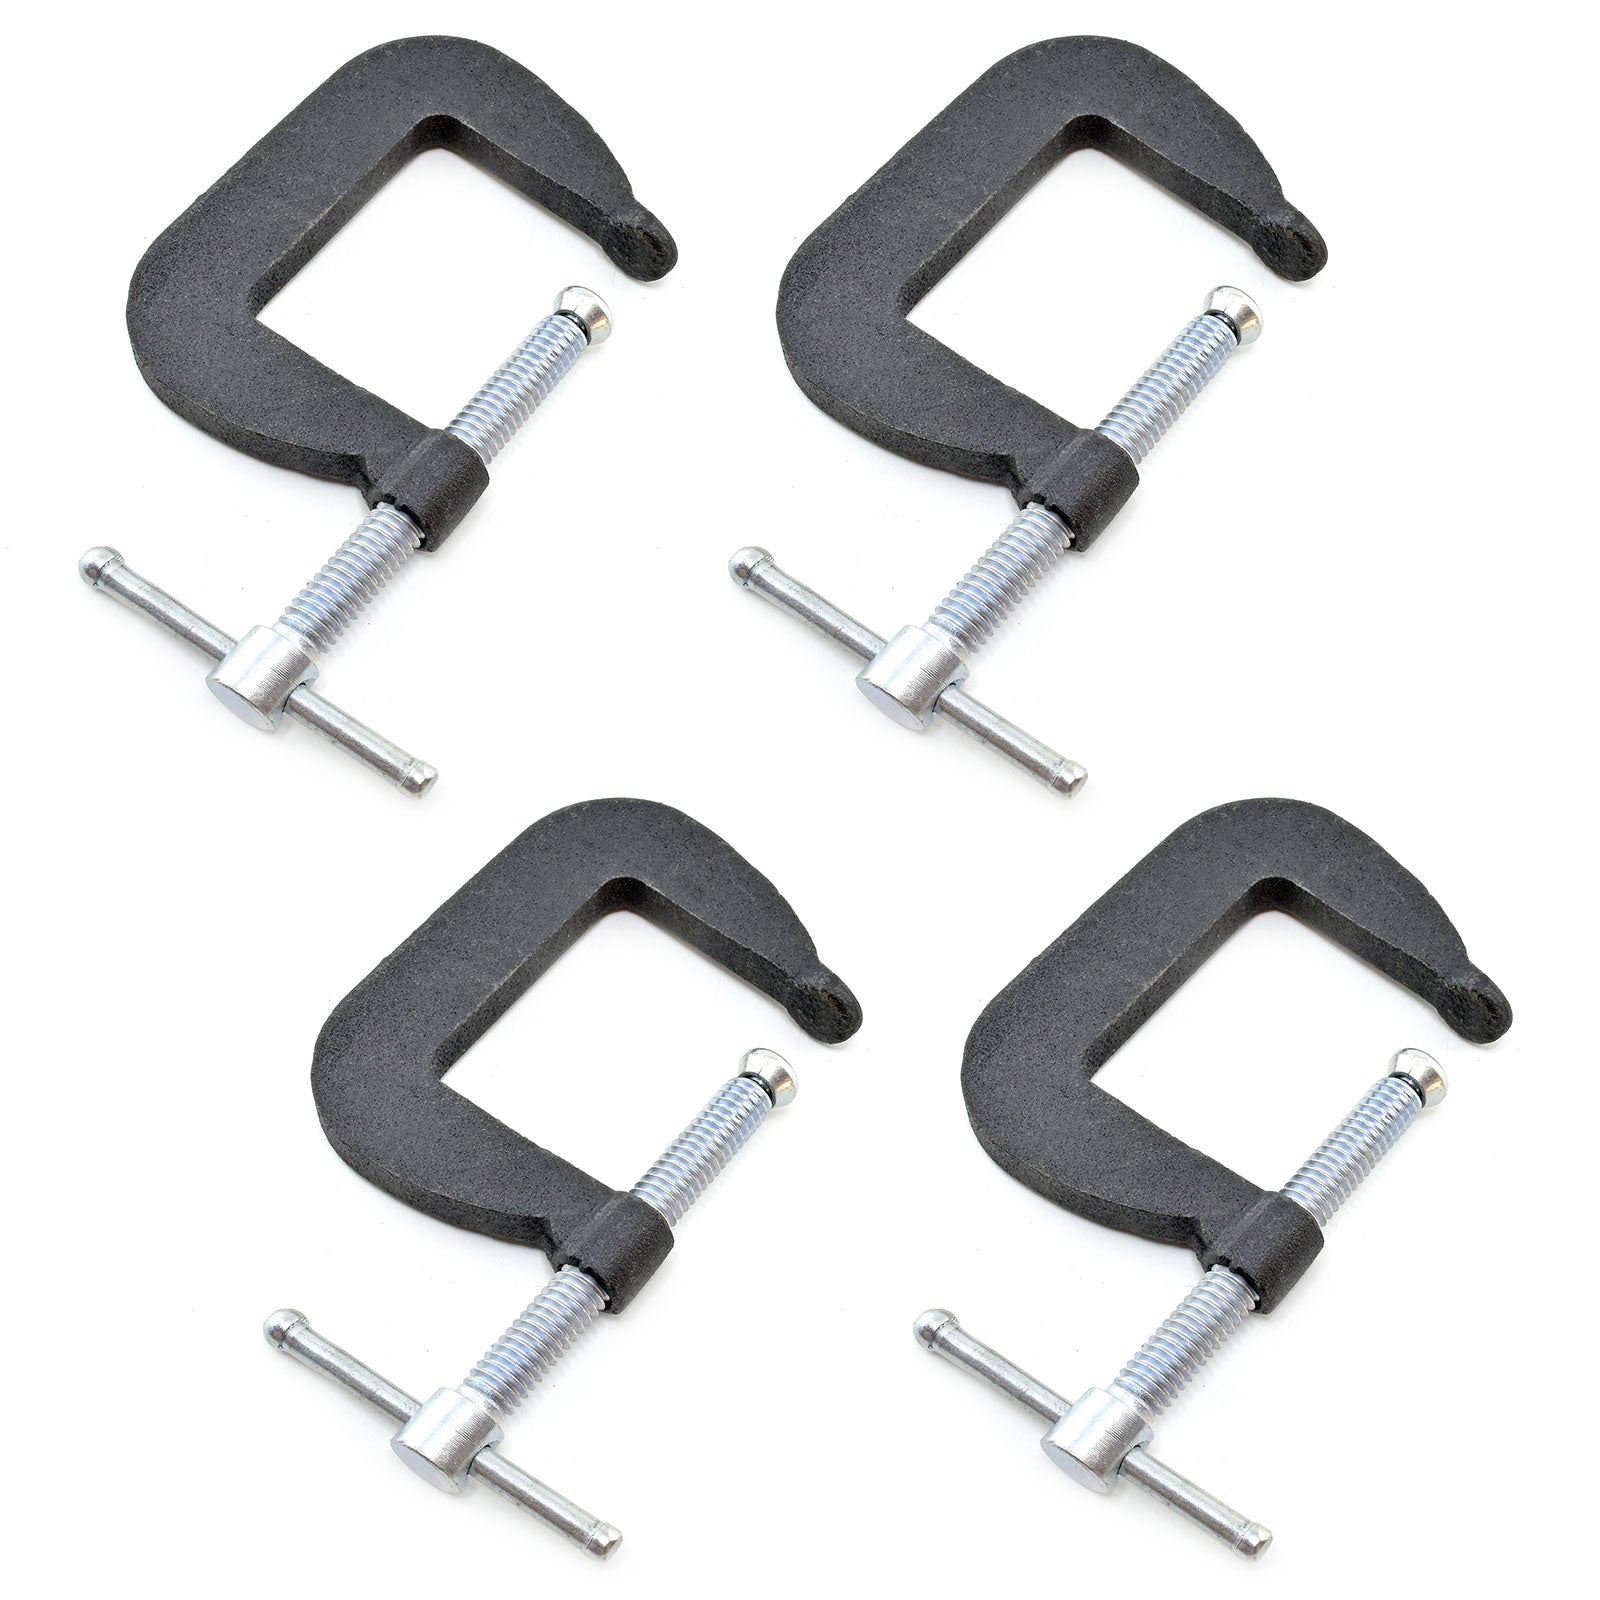 1.5" x 1.5" Miniature Forged Steel C - clamp, Set of 4 - Micro - Mark Tool Clamps & Vises